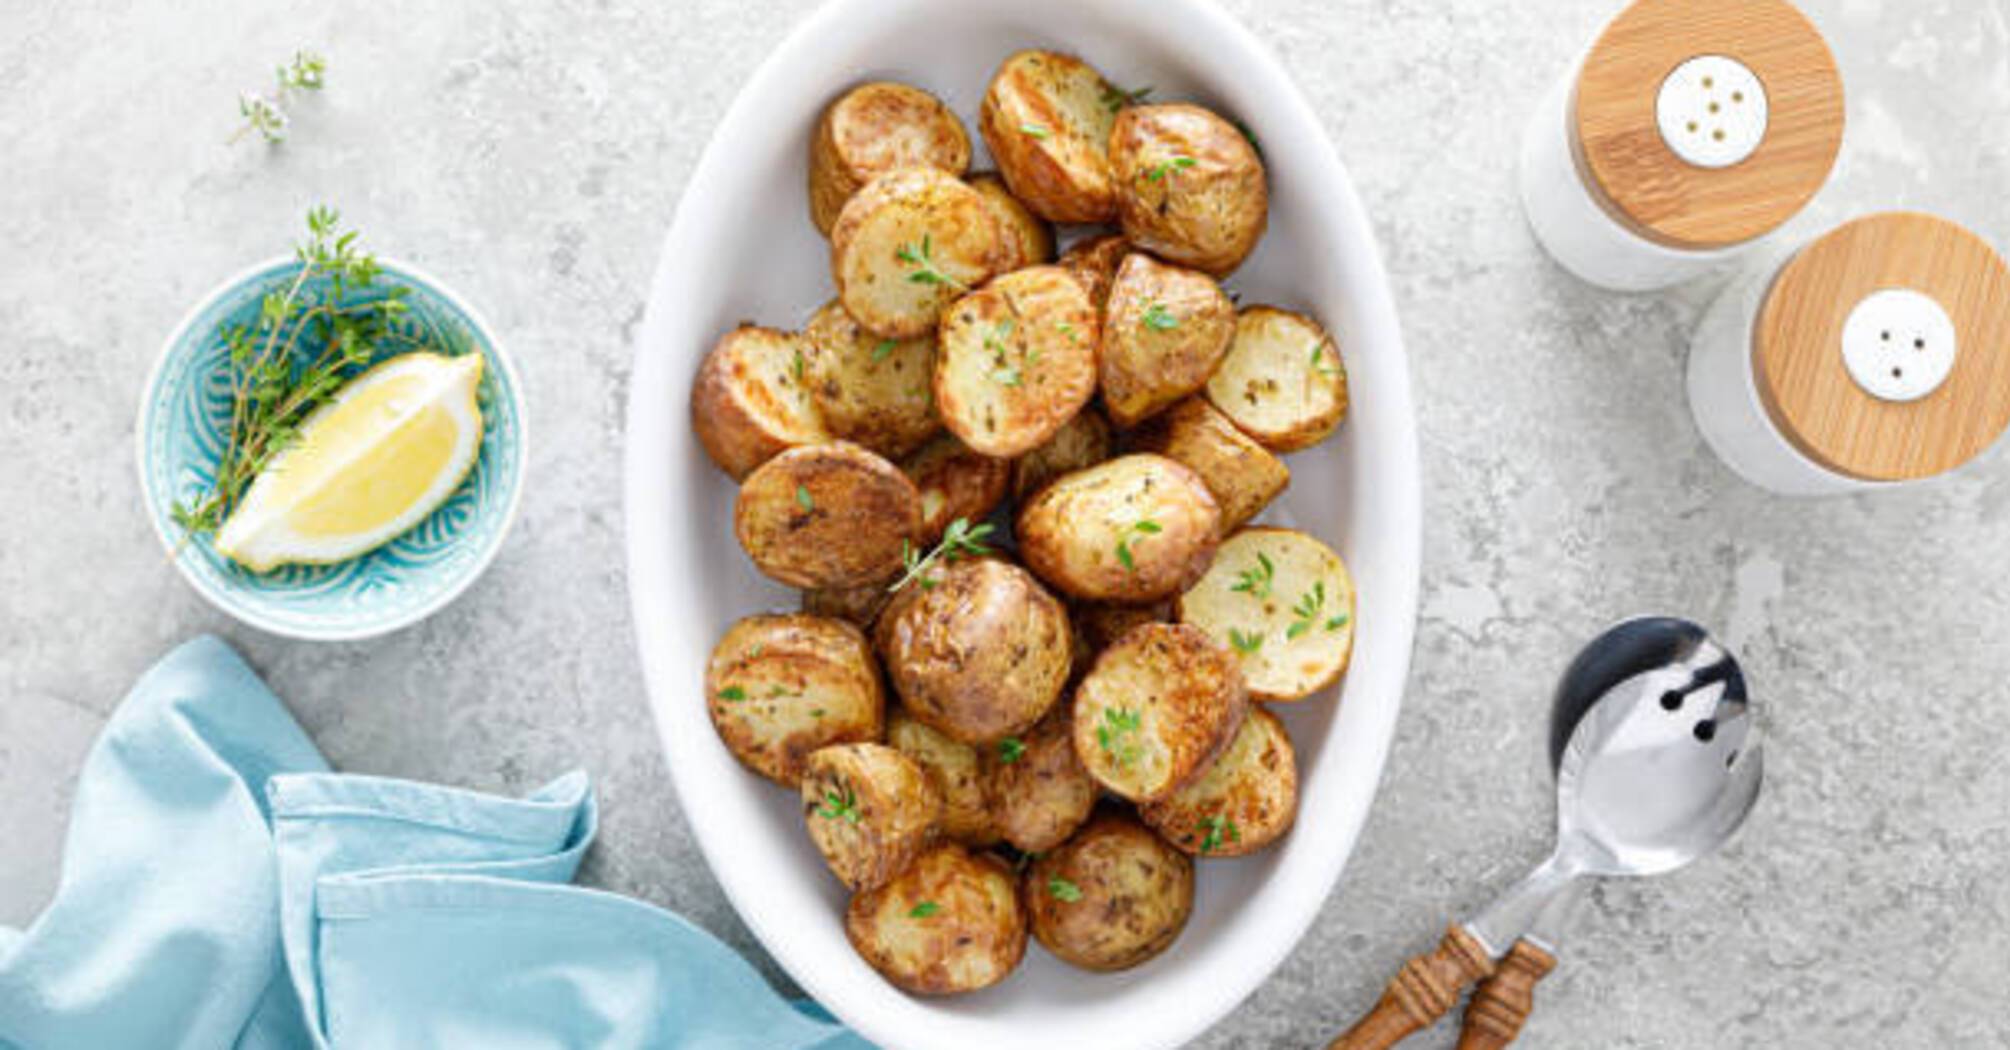 What to do before baking to make potatoes crispy: life hack